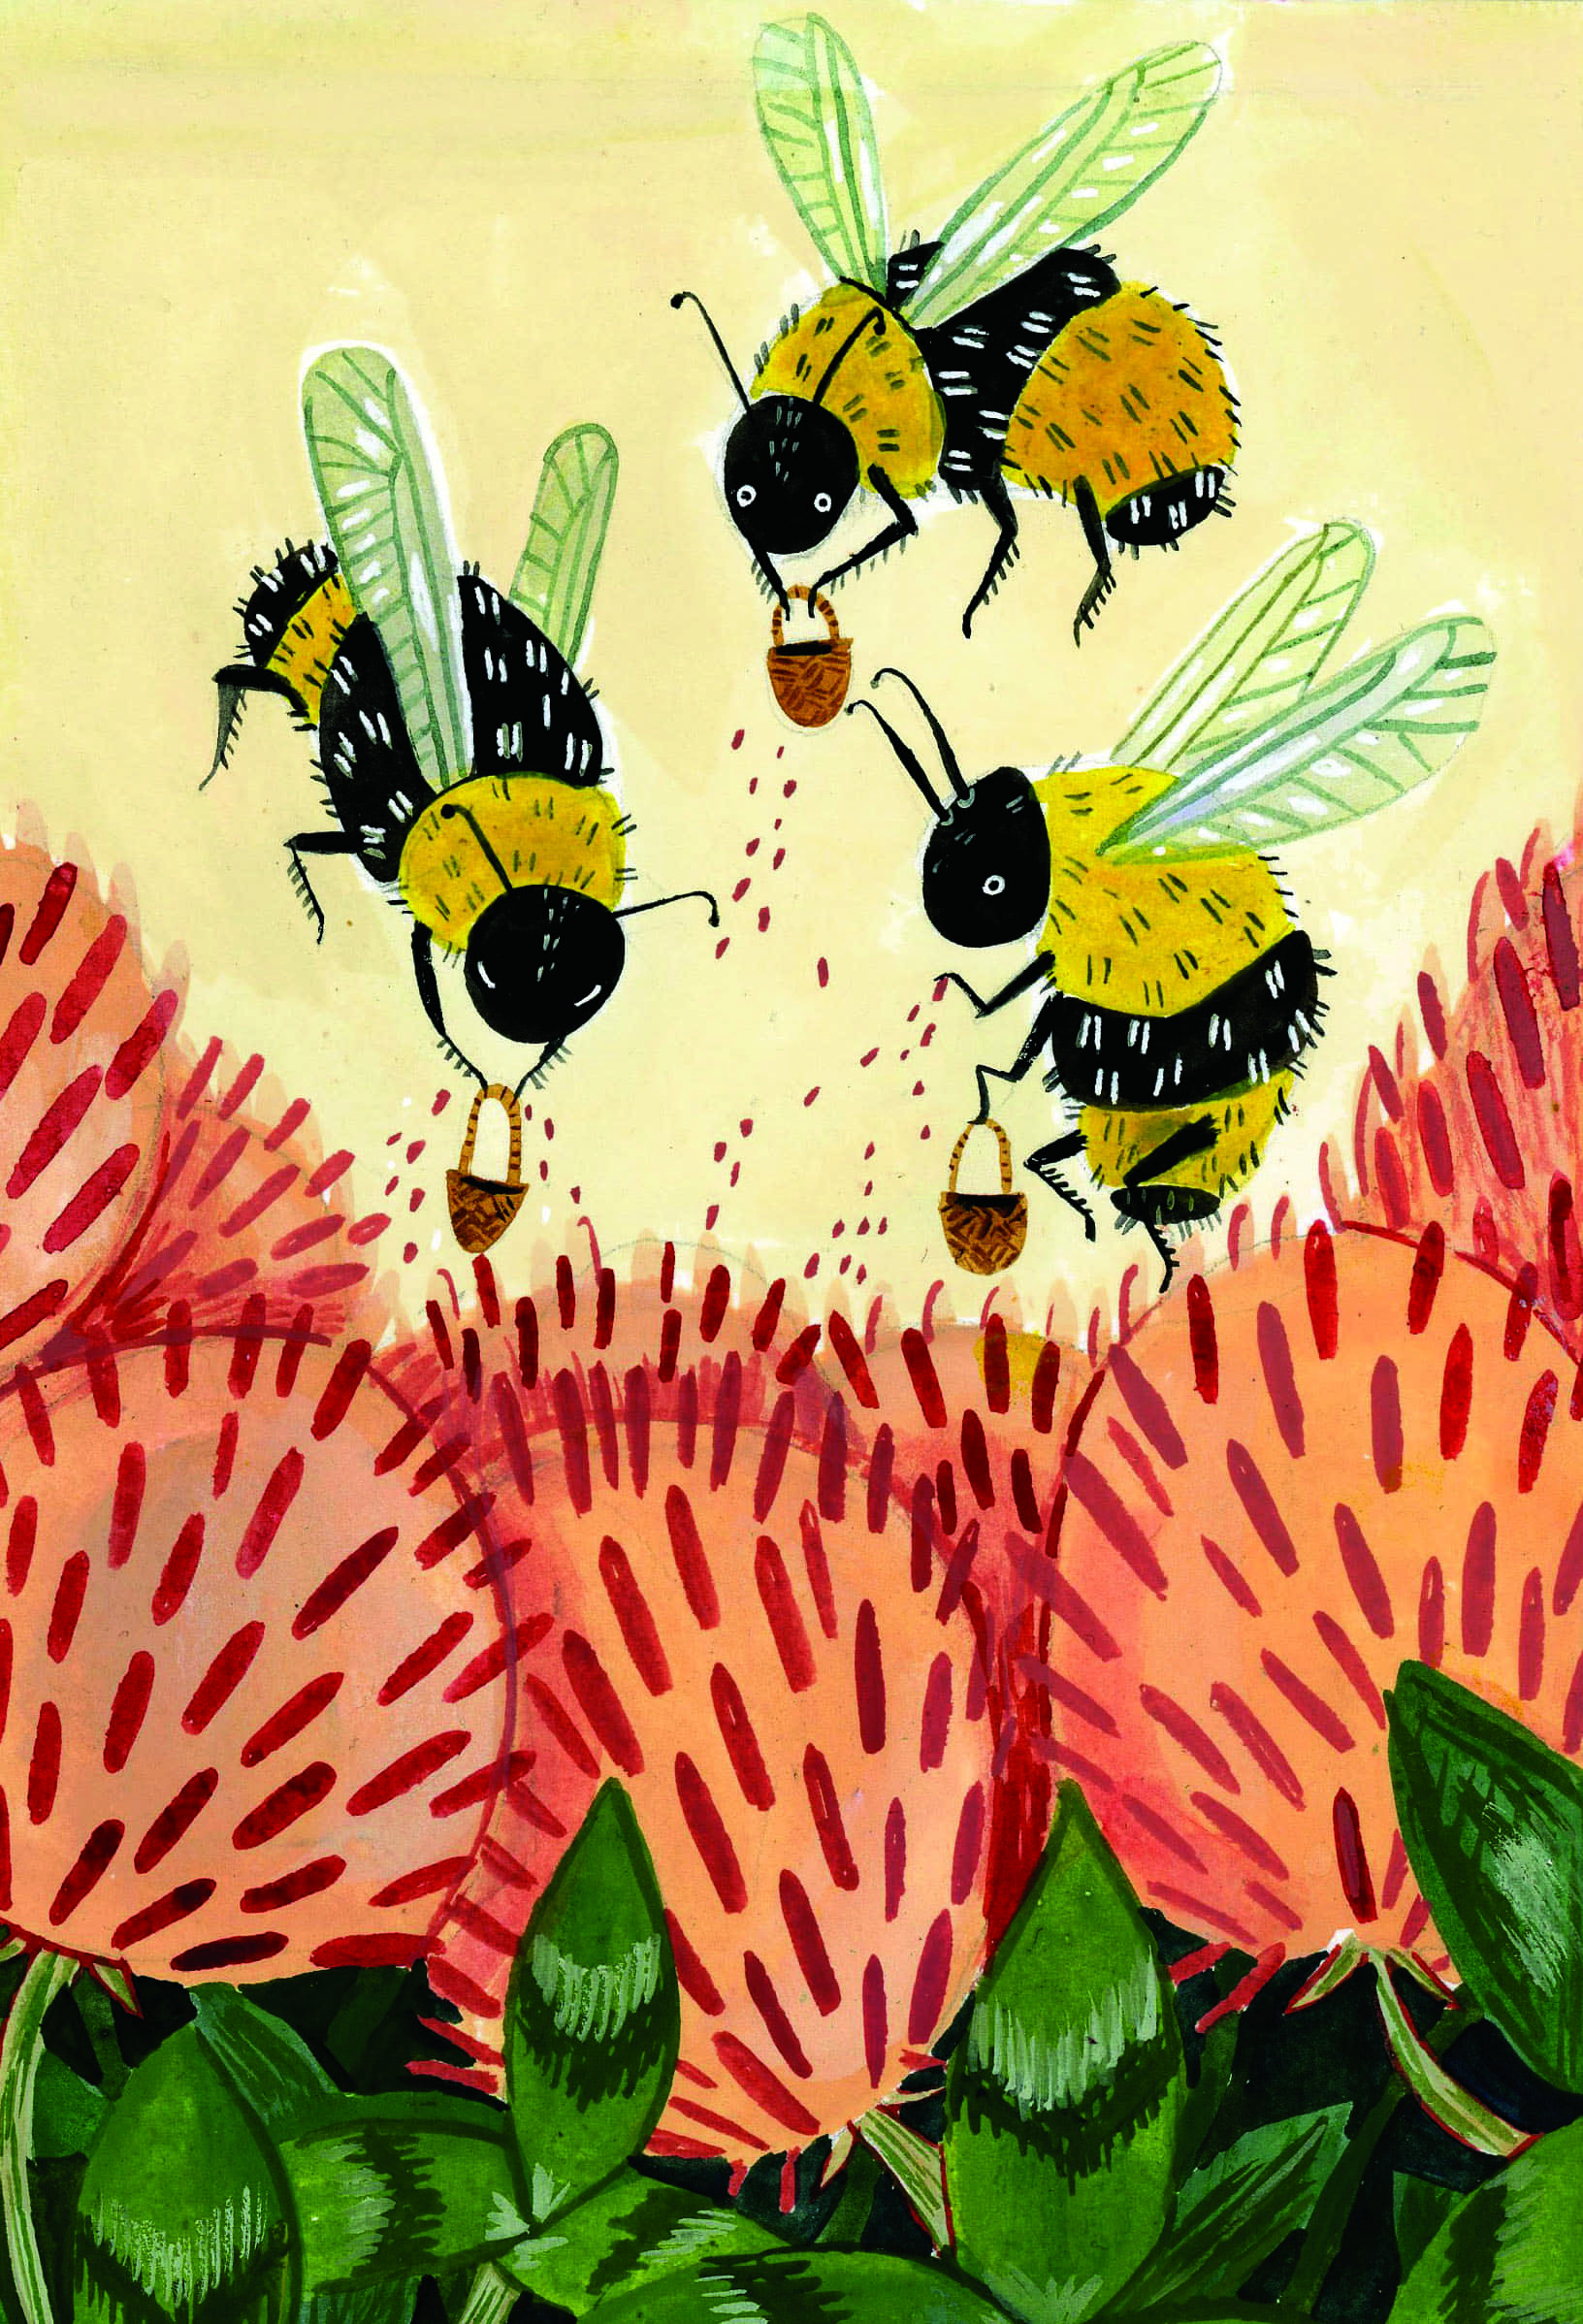  Pollinating Bees with Border 